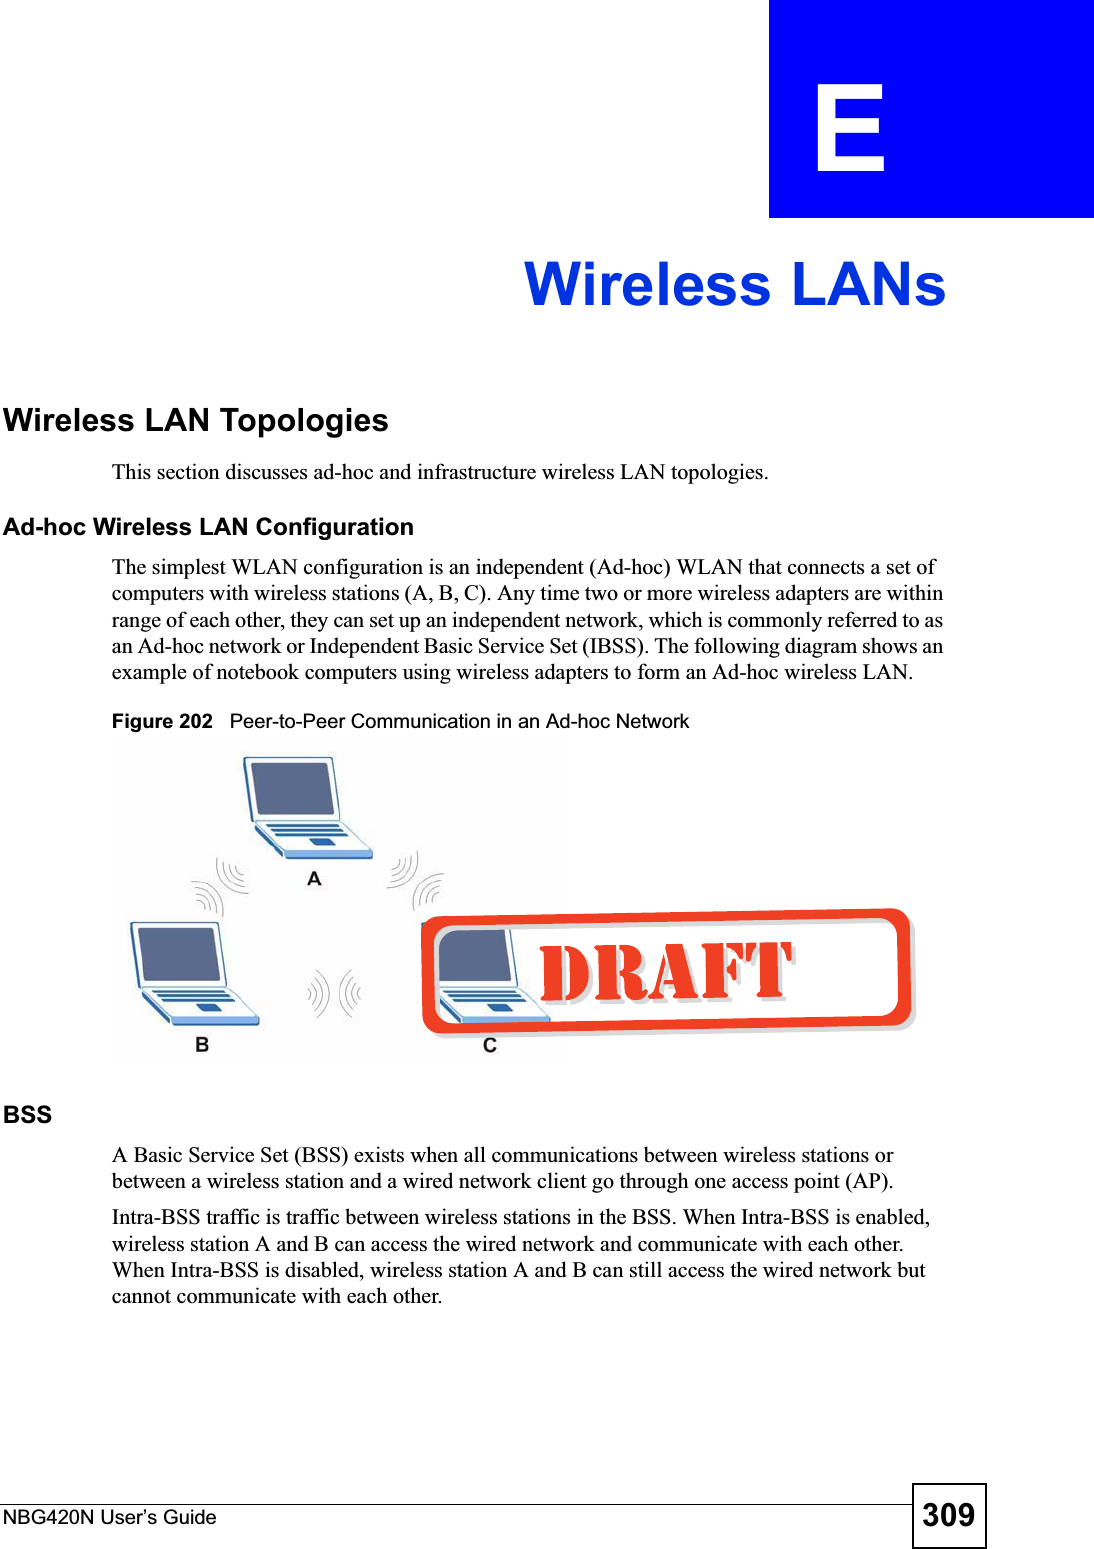 NBG420N User’s Guide 309APPENDIX  E Wireless LANsWireless LAN TopologiesThis section discusses ad-hoc and infrastructure wireless LAN topologies.Ad-hoc Wireless LAN ConfigurationThe simplest WLAN configuration is an independent (Ad-hoc) WLAN that connects a set of computers with wireless stations (A, B, C). Any time two or more wireless adapters are within range of each other, they can set up an independent network, which is commonly referred to as an Ad-hoc network or Independent Basic Service Set (IBSS). The following diagram shows an example of notebook computers using wireless adapters to form an Ad-hoc wireless LAN. Figure 202   Peer-to-Peer Communication in an Ad-hoc NetworkBSSA Basic Service Set (BSS) exists when all communications between wireless stations or between a wireless station and a wired network client go through one access point (AP). Intra-BSS traffic is traffic between wireless stations in the BSS. When Intra-BSS is enabled, wireless station A and B can access the wired network and communicate with each other. When Intra-BSS is disabled, wireless station A and B can still access the wired network but cannot communicate with each other.